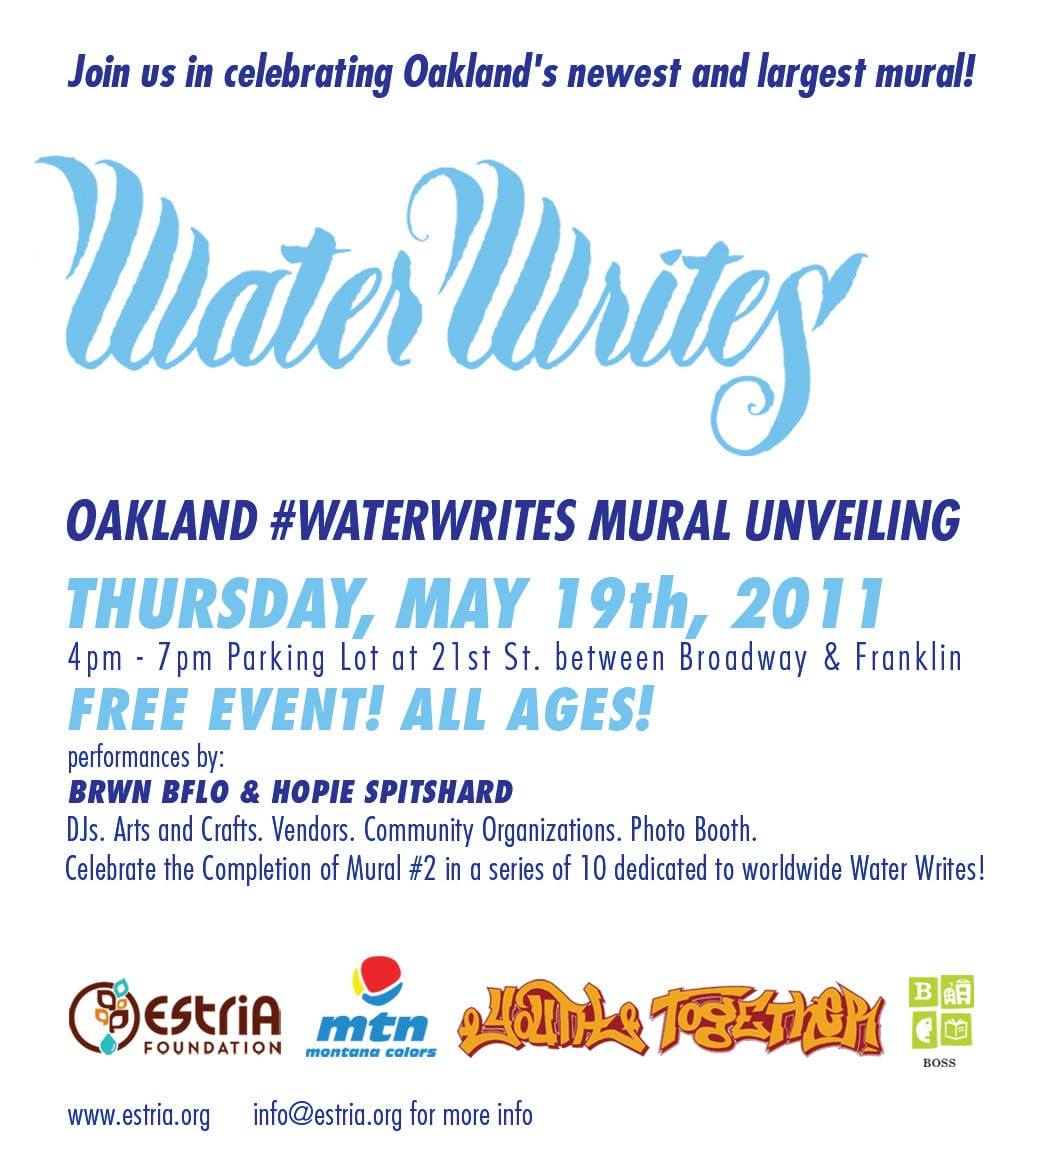 WaterWrites Oakland Mural Unveiling May 19th